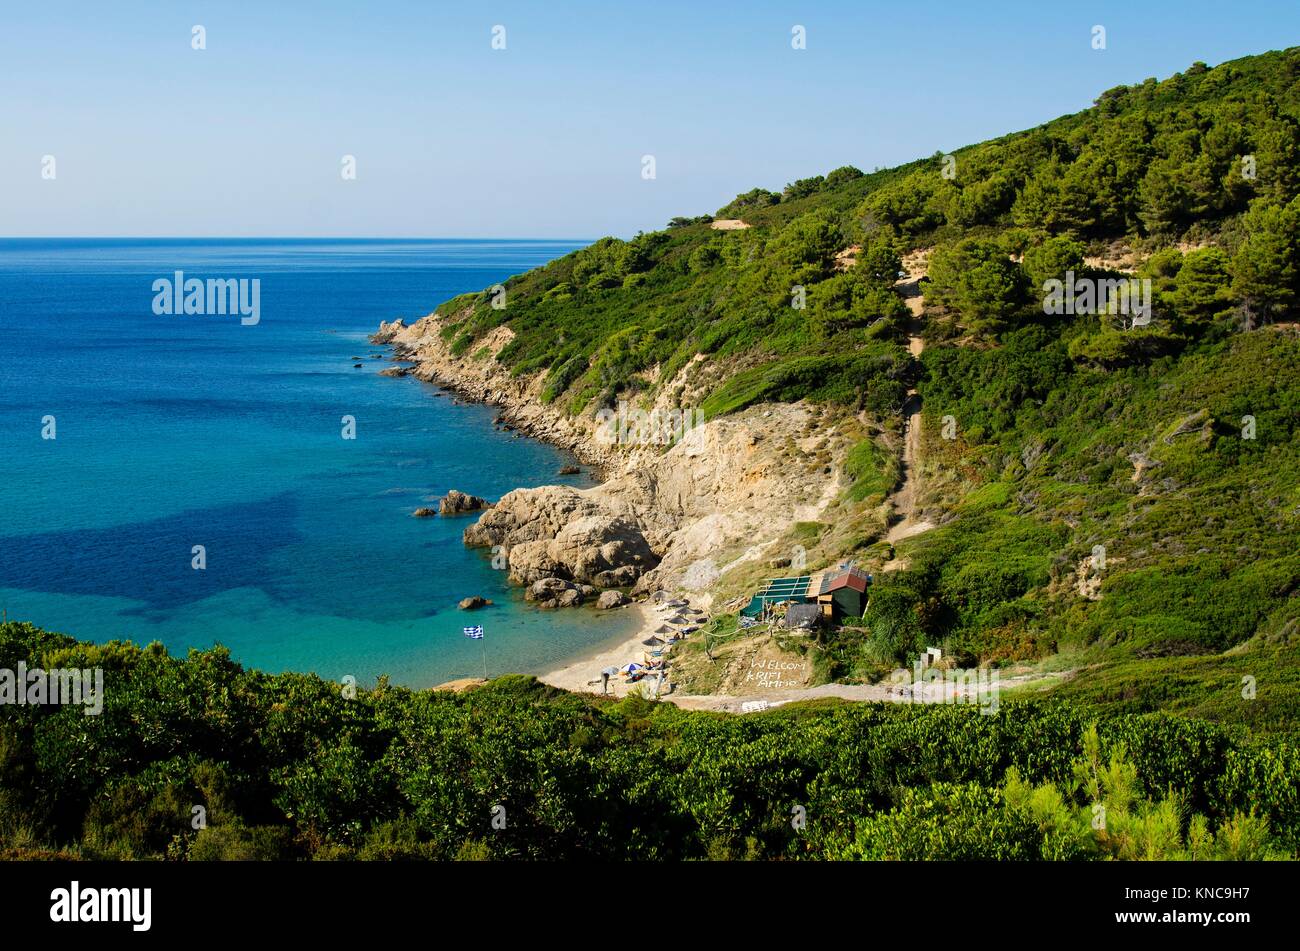 View from the top of the beach of Krifi Ammos on the island of Skiathos Greece, the sea is green and turquoise surrounded by rich vegetation. Stock Photo